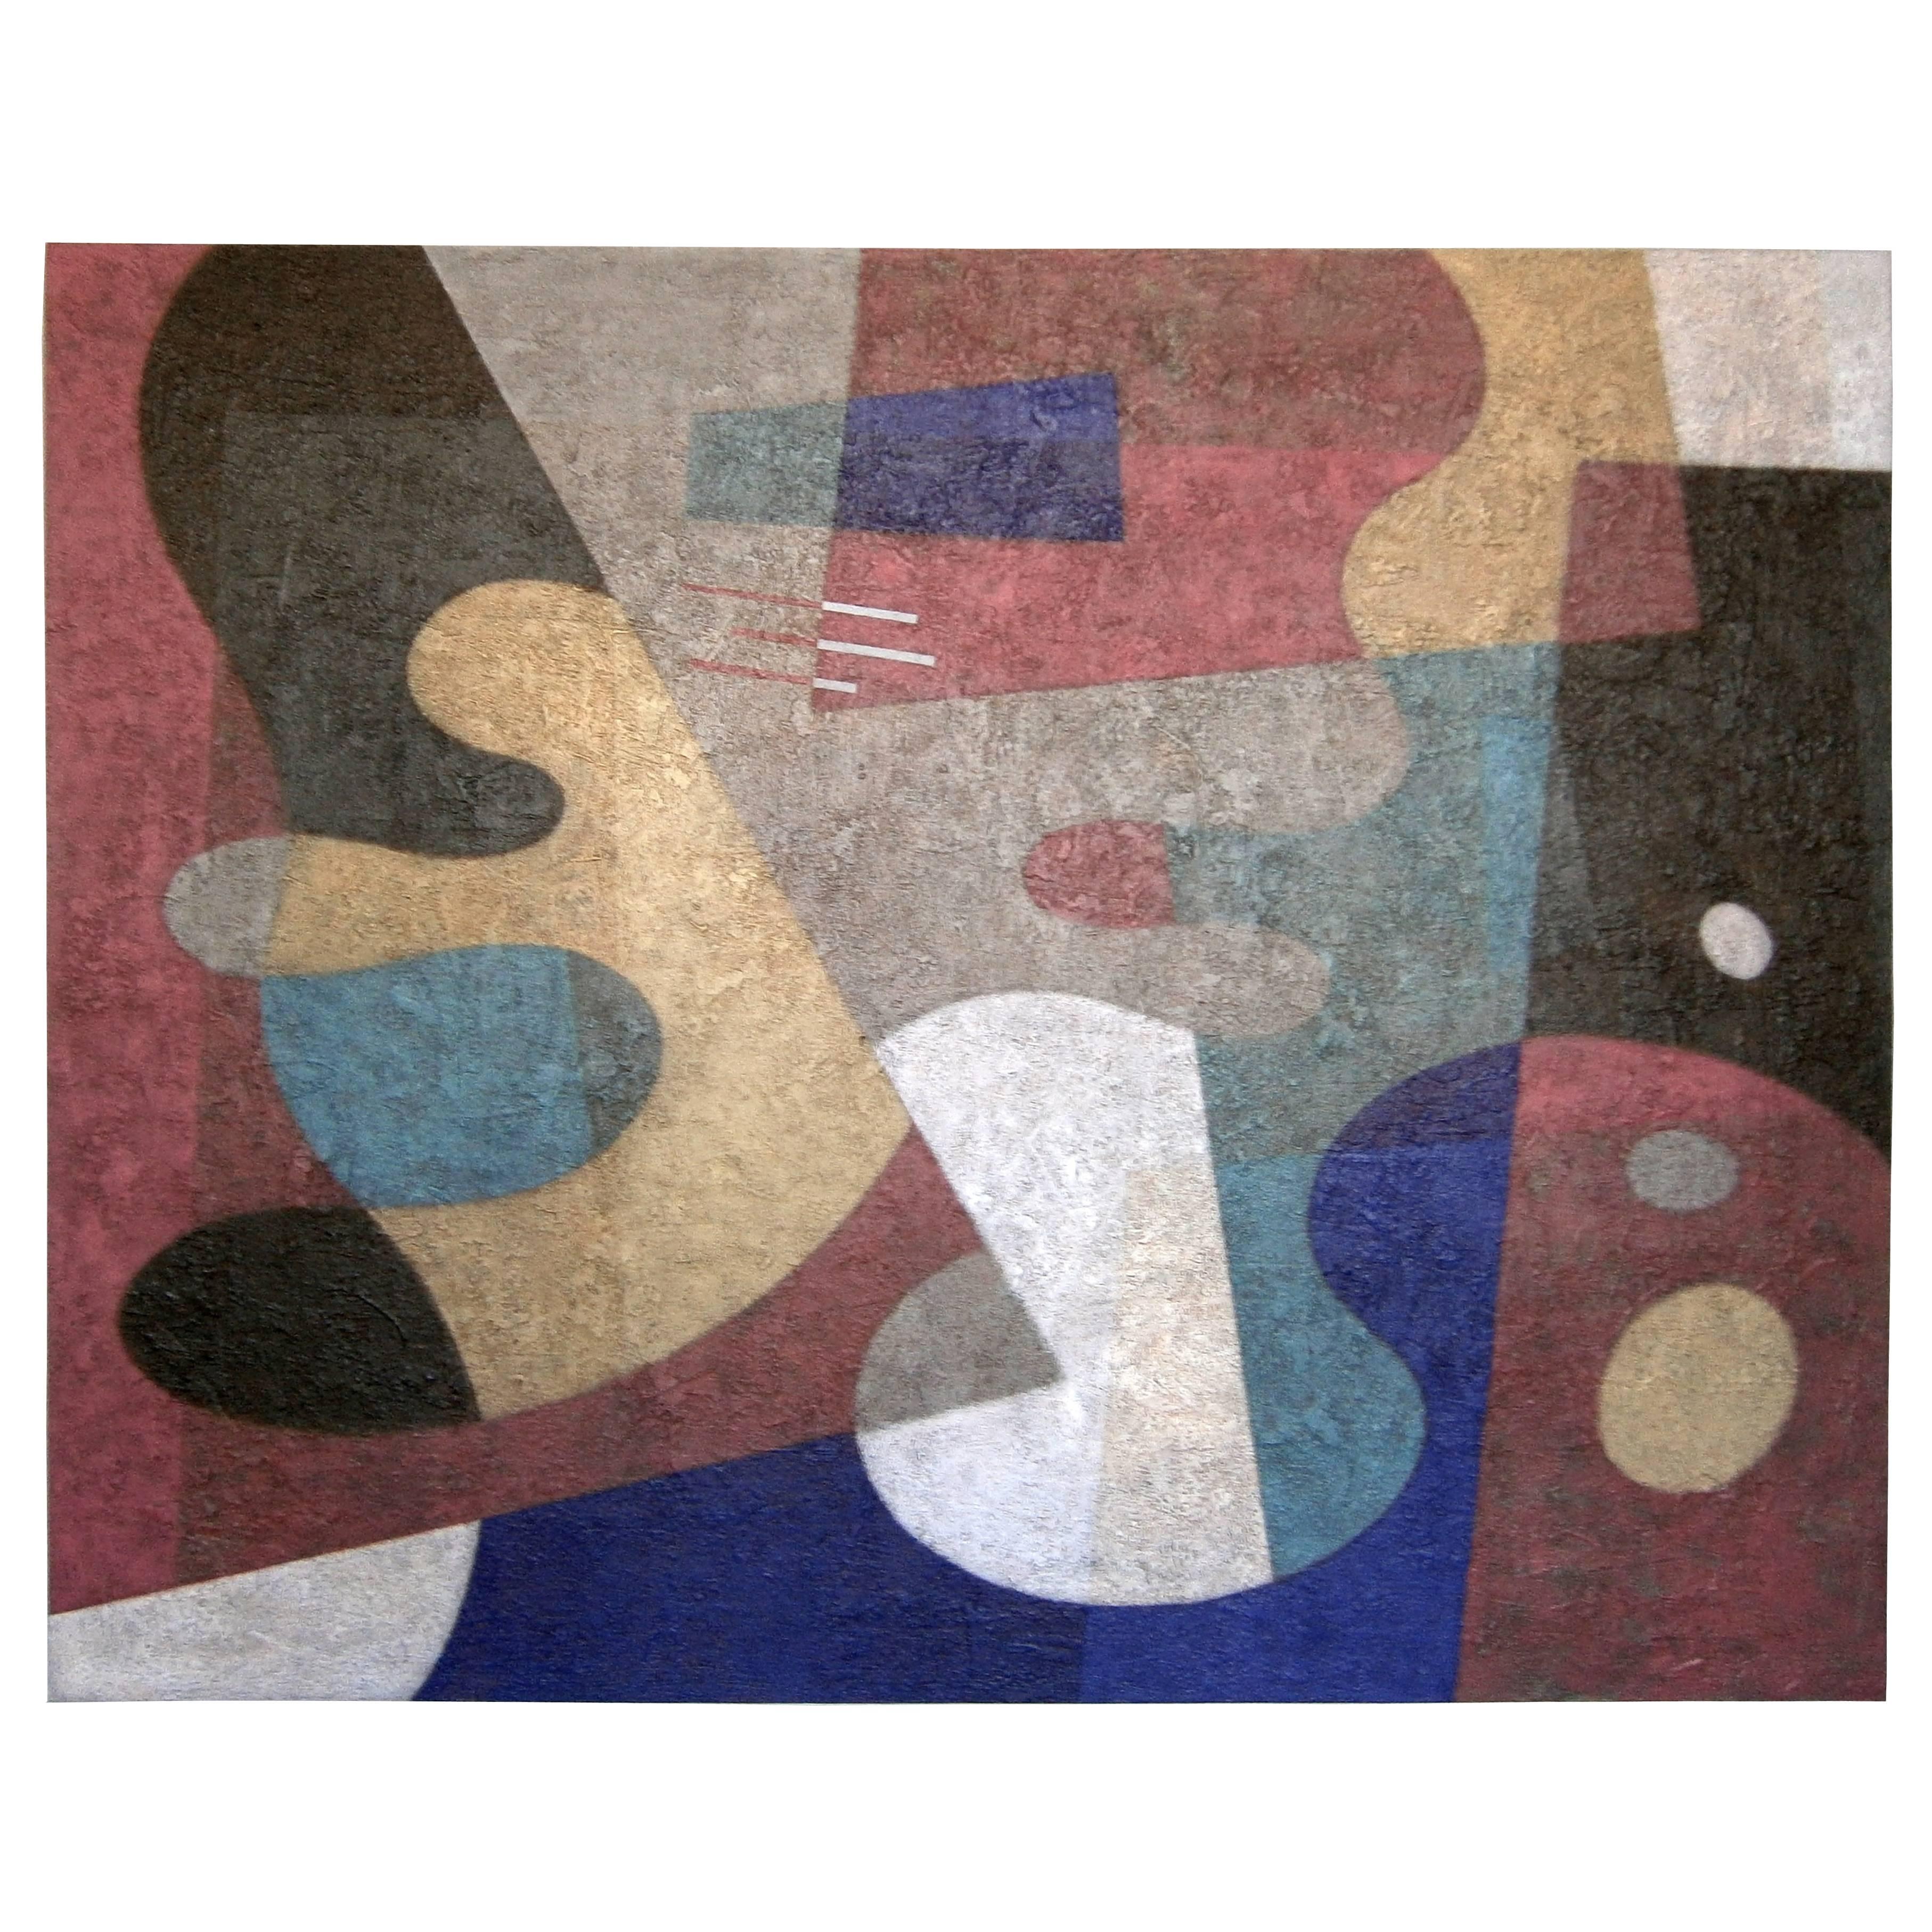 Mid-Century Inspired Geometric Abstract Painting by American Artist "Downs" For Sale